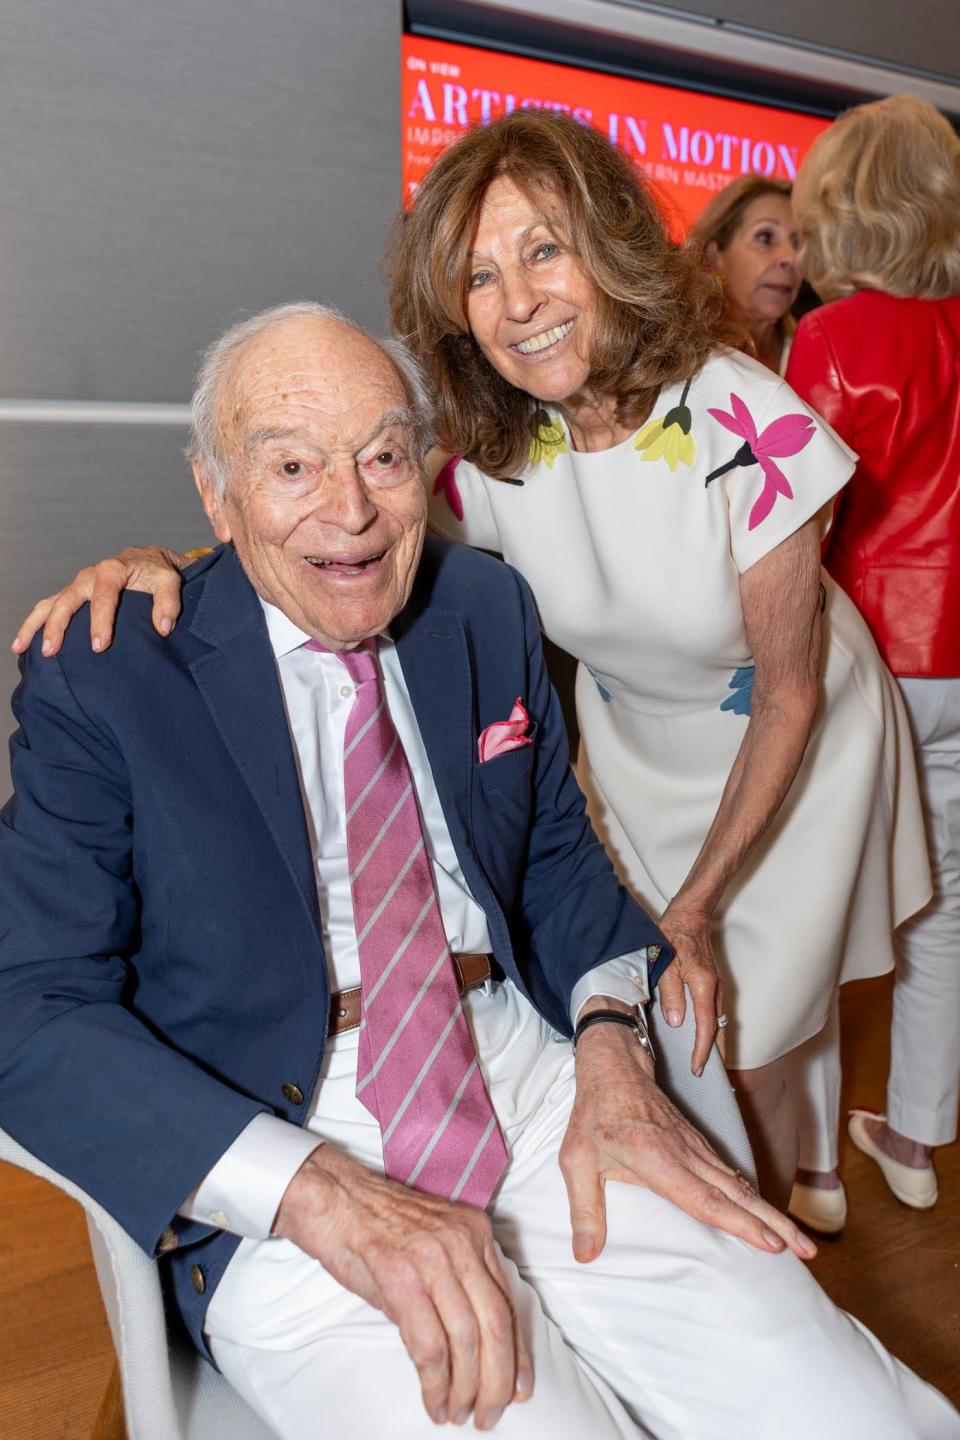 Leonard Lauder and Judy Glickman Lauder attend a Nov. 30 reception to mark the opening of "Presence: The Photography Collection of Judy Glickman Lauder."